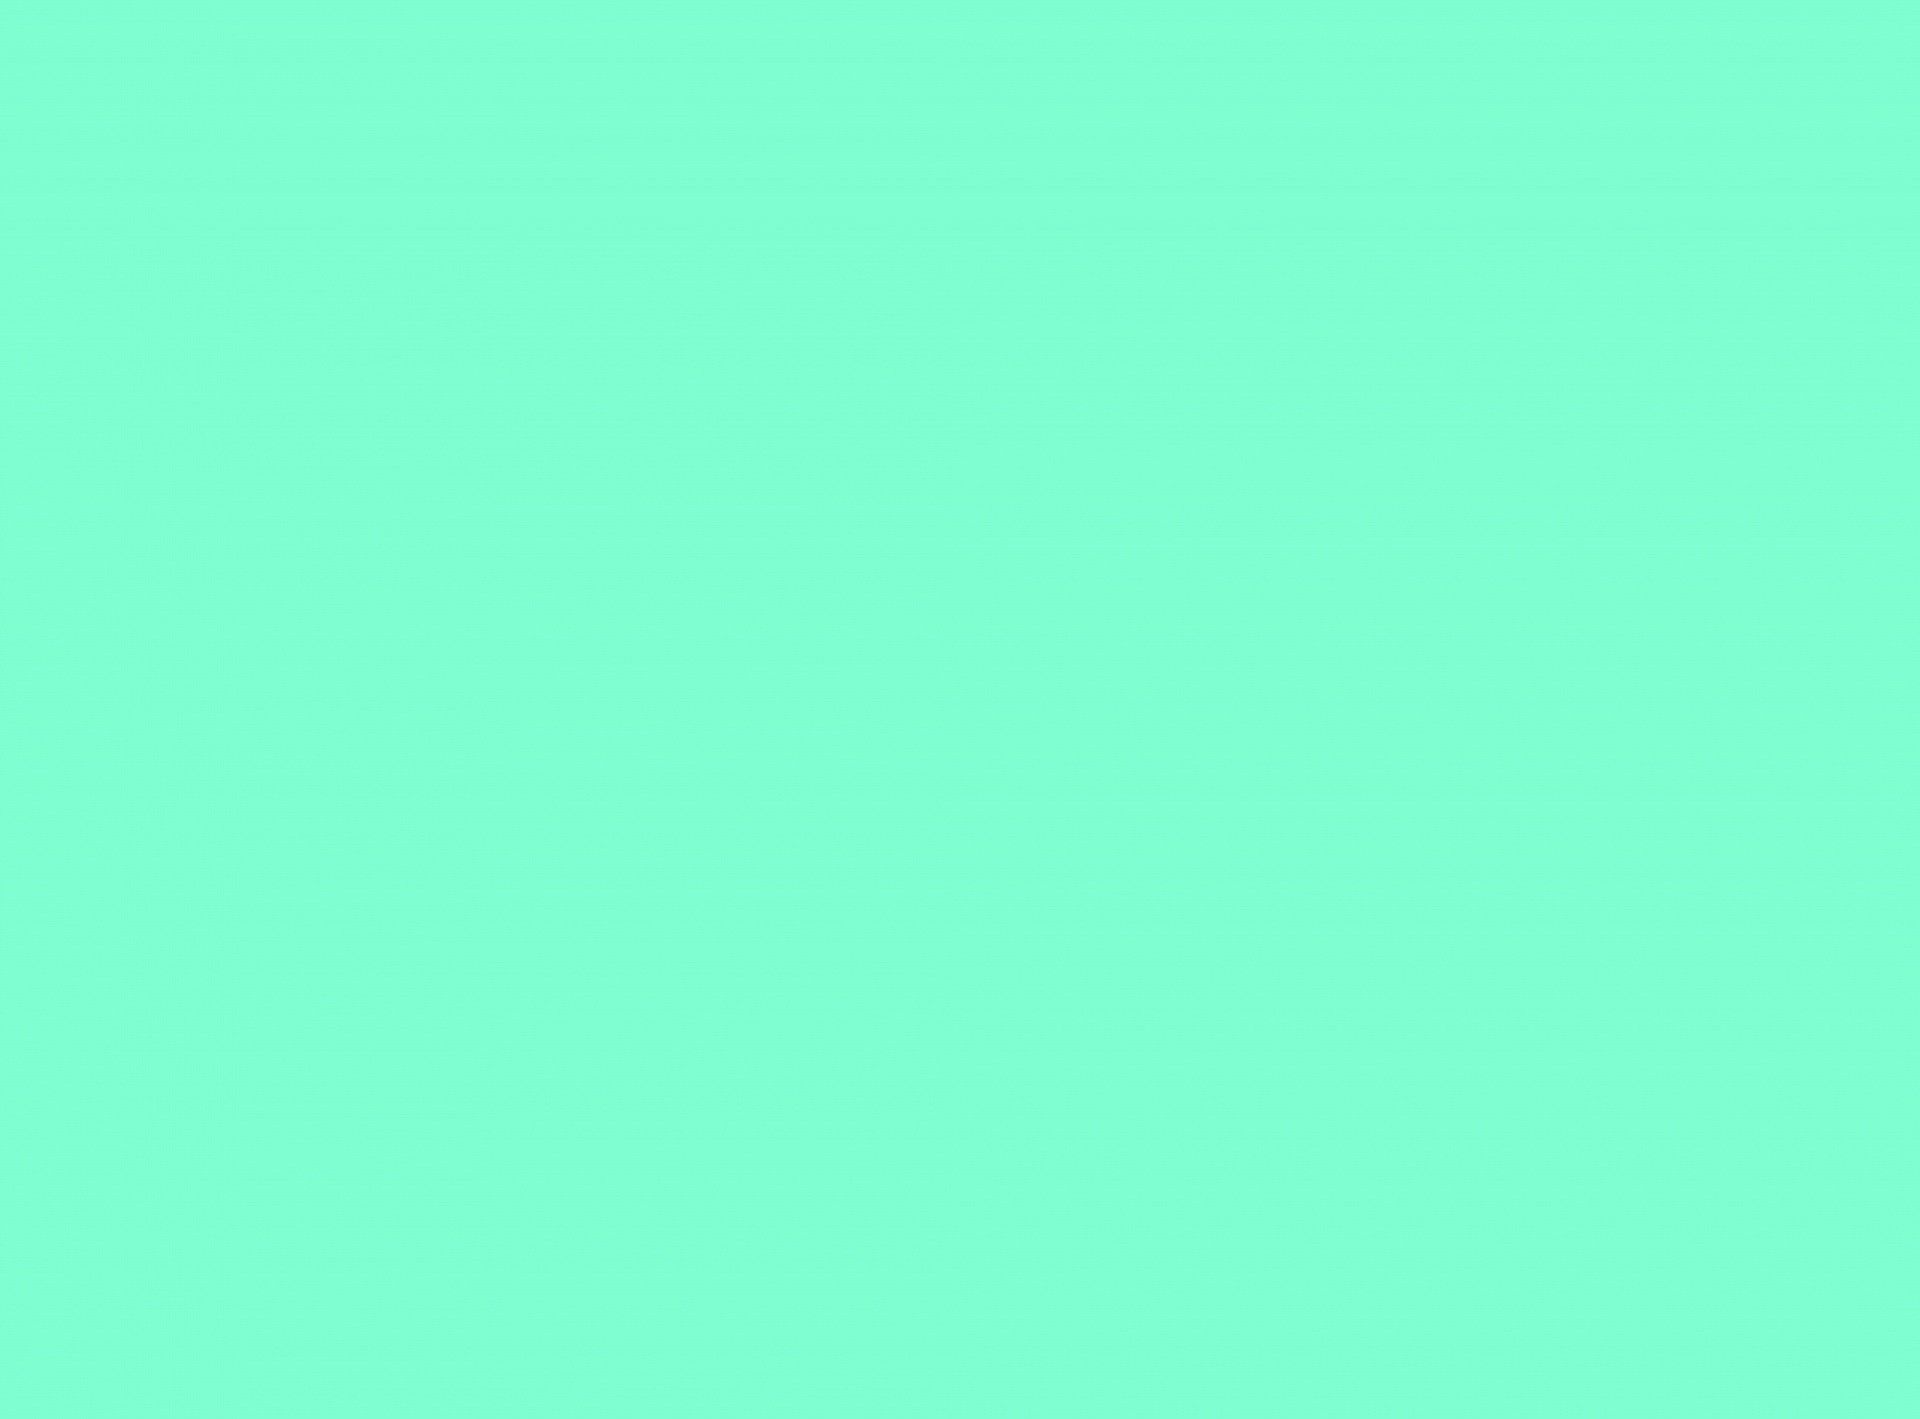 40 Mint Green Wallpaper Backgrounds For Iphone  Mint green wallpaper  Green wallpaper Mint green aesthetic